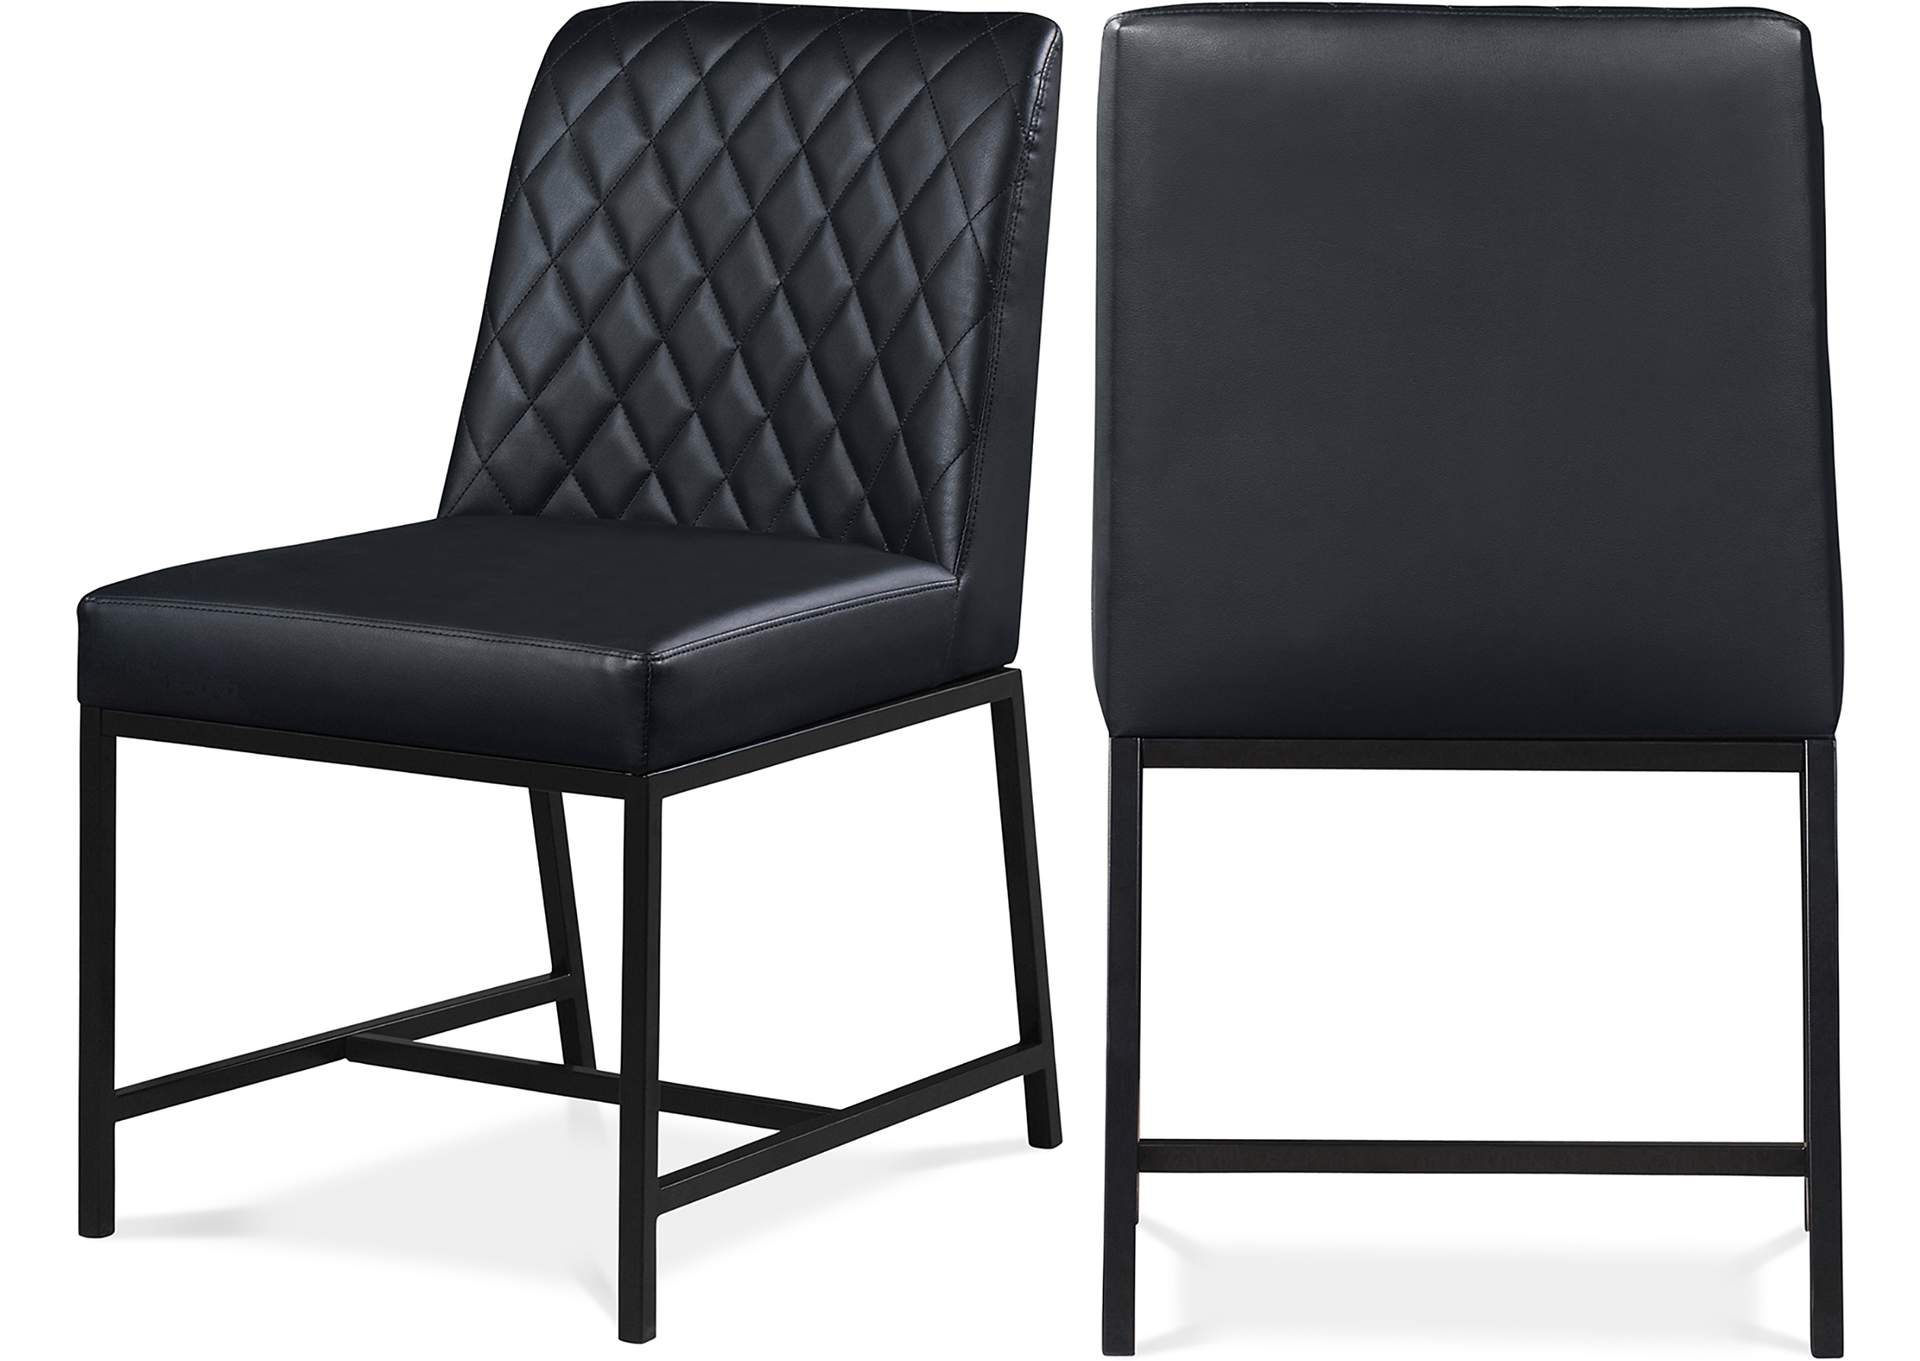 Bryce Black Faux Leather Dining Chairs, Black Leather Parsons Chairs